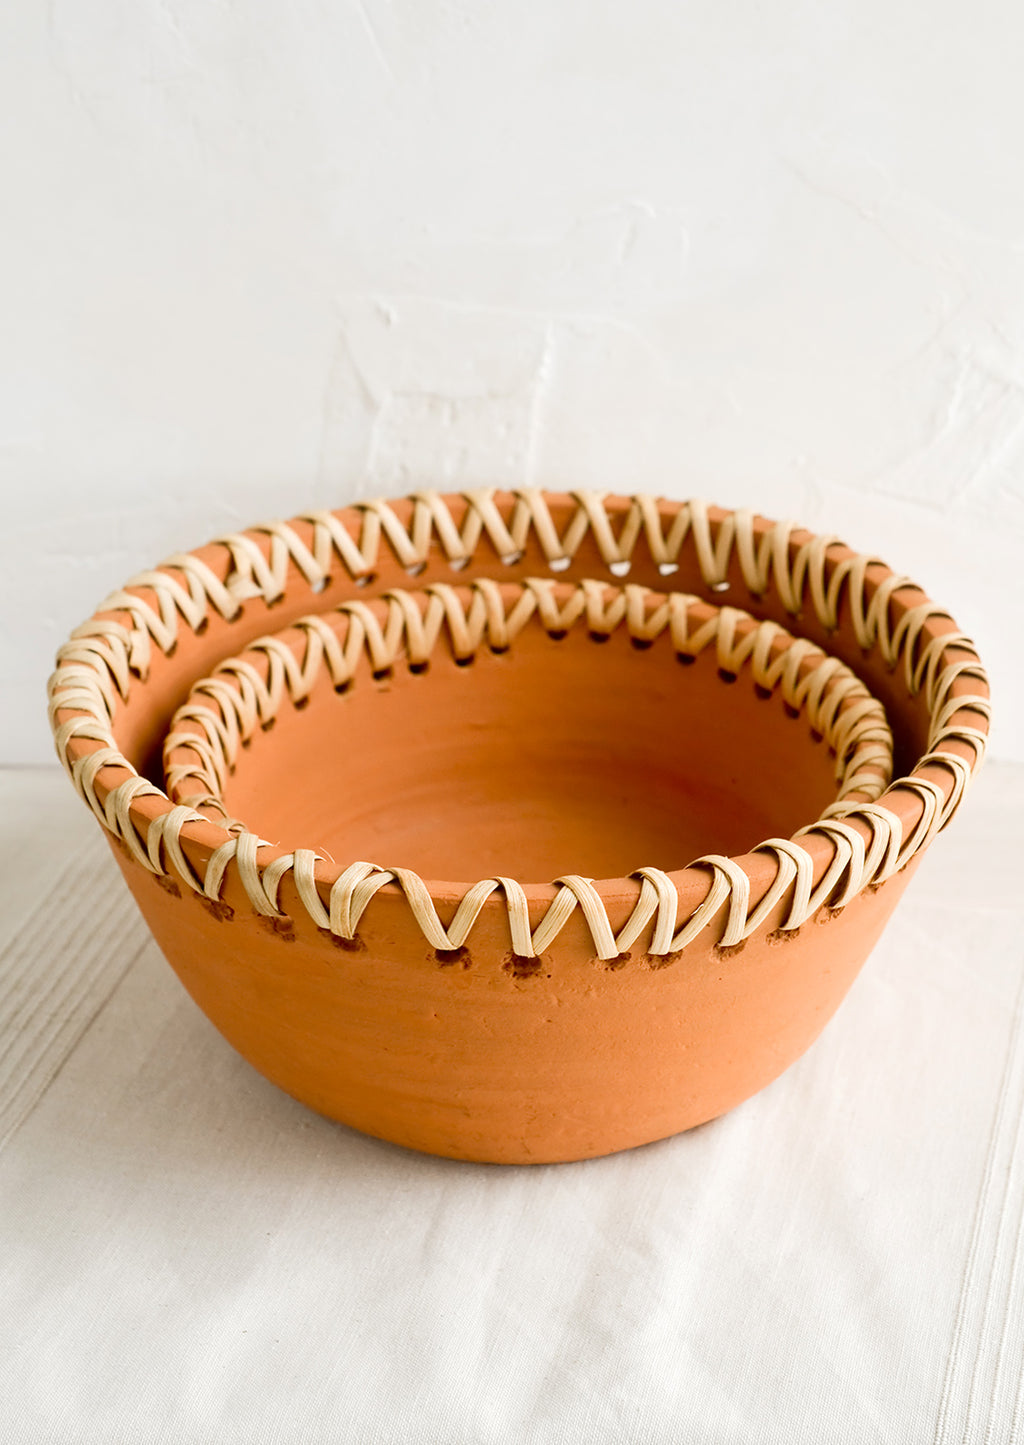 2: Nesting terracotta bowls with decorative woven seagrass trim around top.